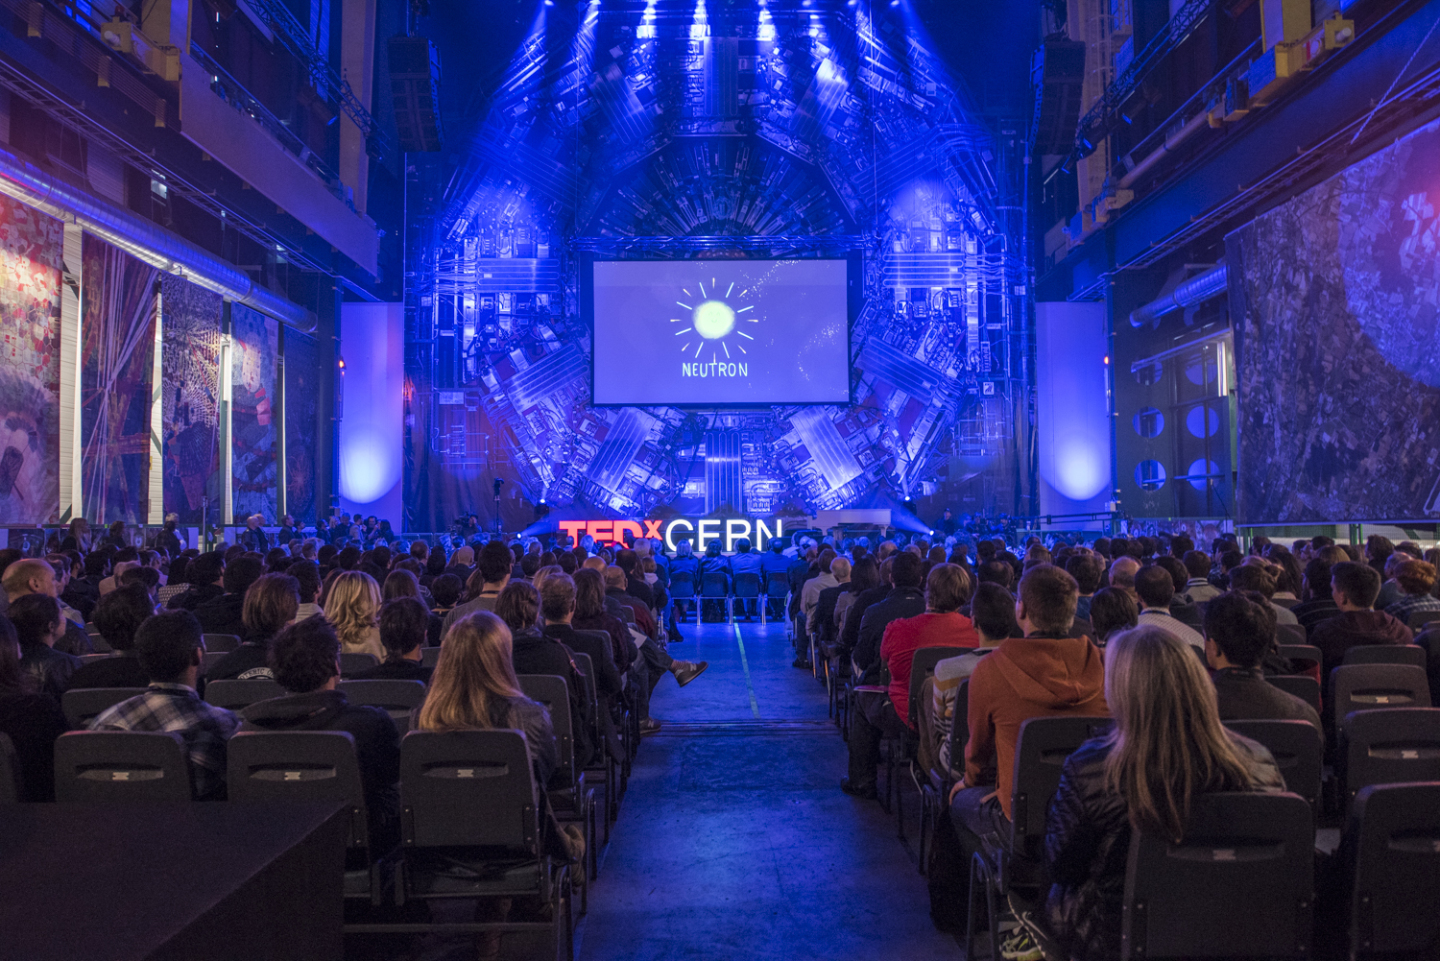 TEDxCERN gets the TED spotlight